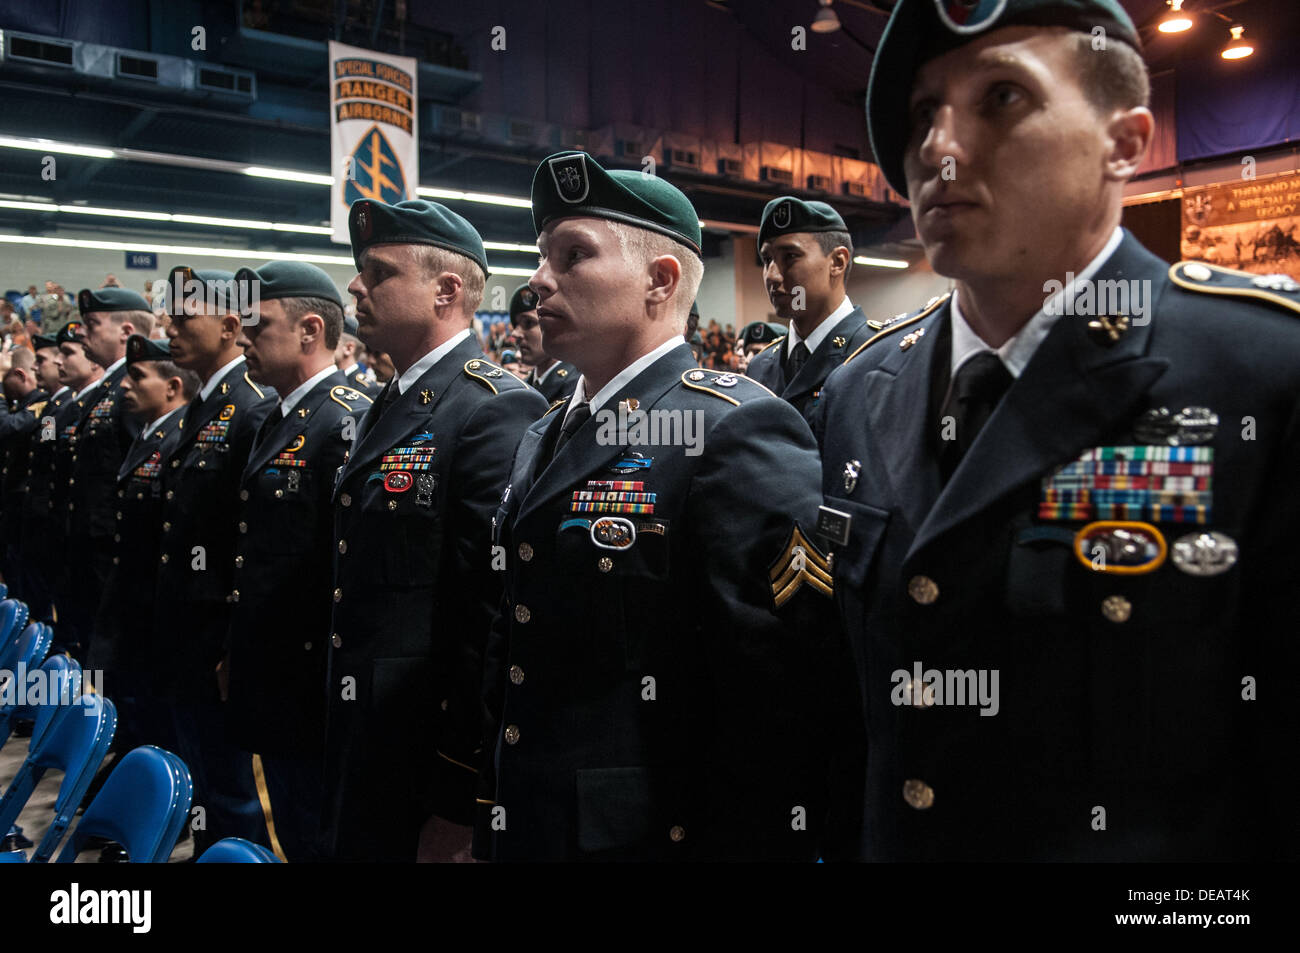 August 1, 2013 - Raleigh, North Carolina, U.S. - U.S. Army Green Beret  soldiers wear their green berets for the first time at the Cumberland  County Coliseum in Fayetteville, N.C. during the